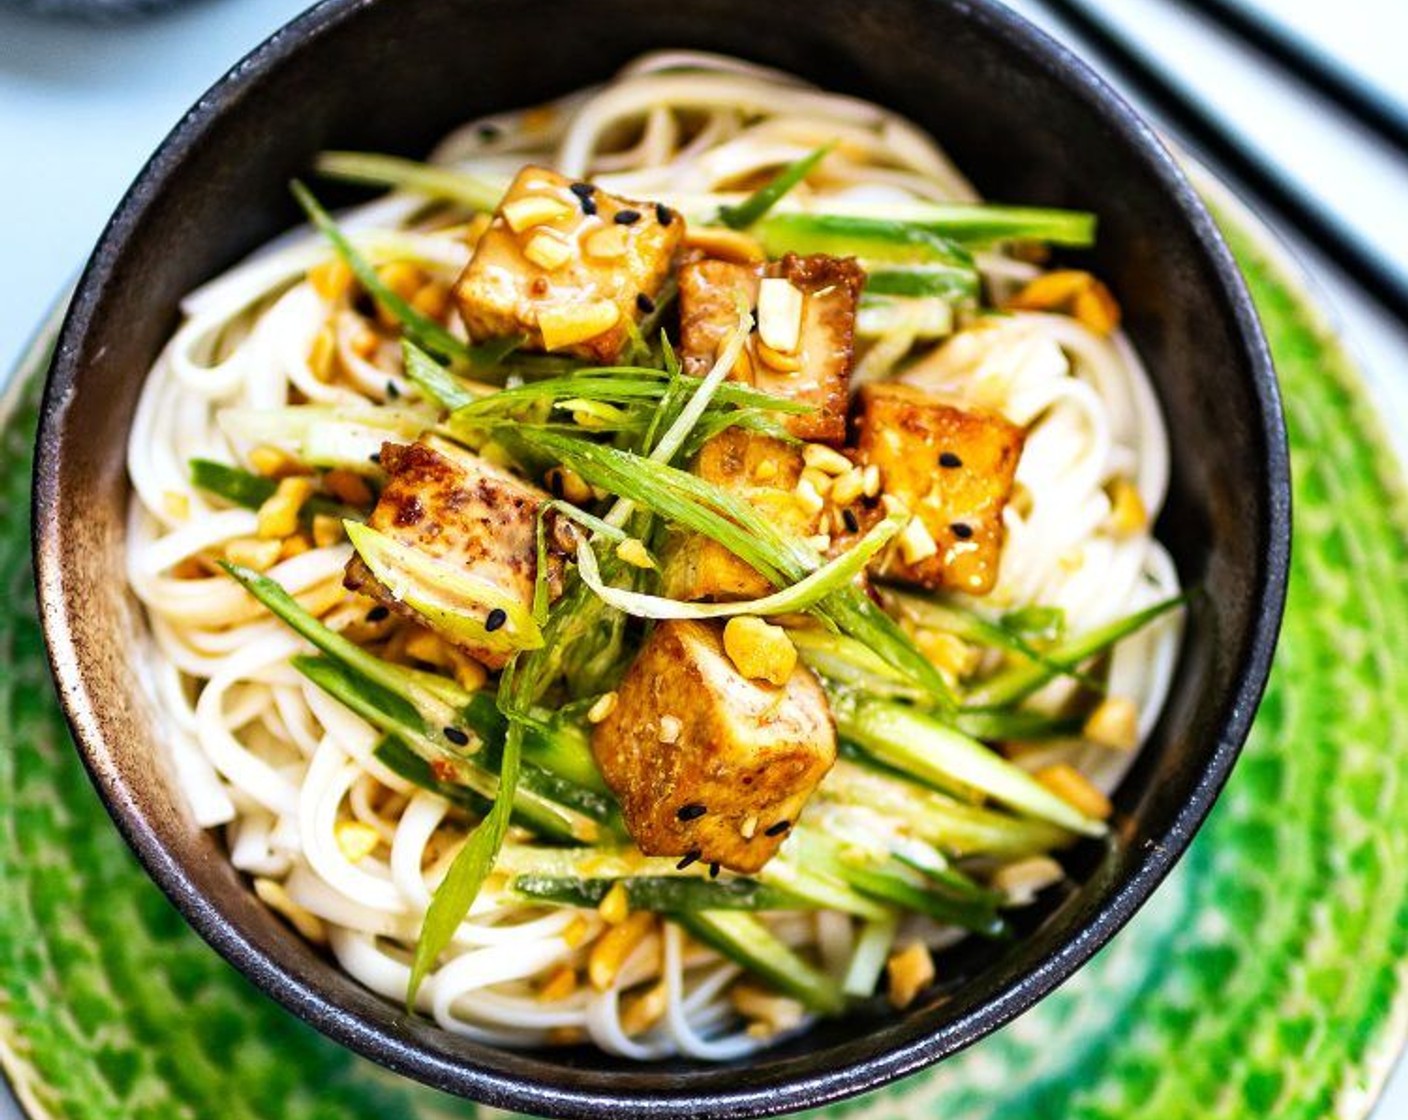 Cold Soba Noodles with Tofu and Sesame Sauce